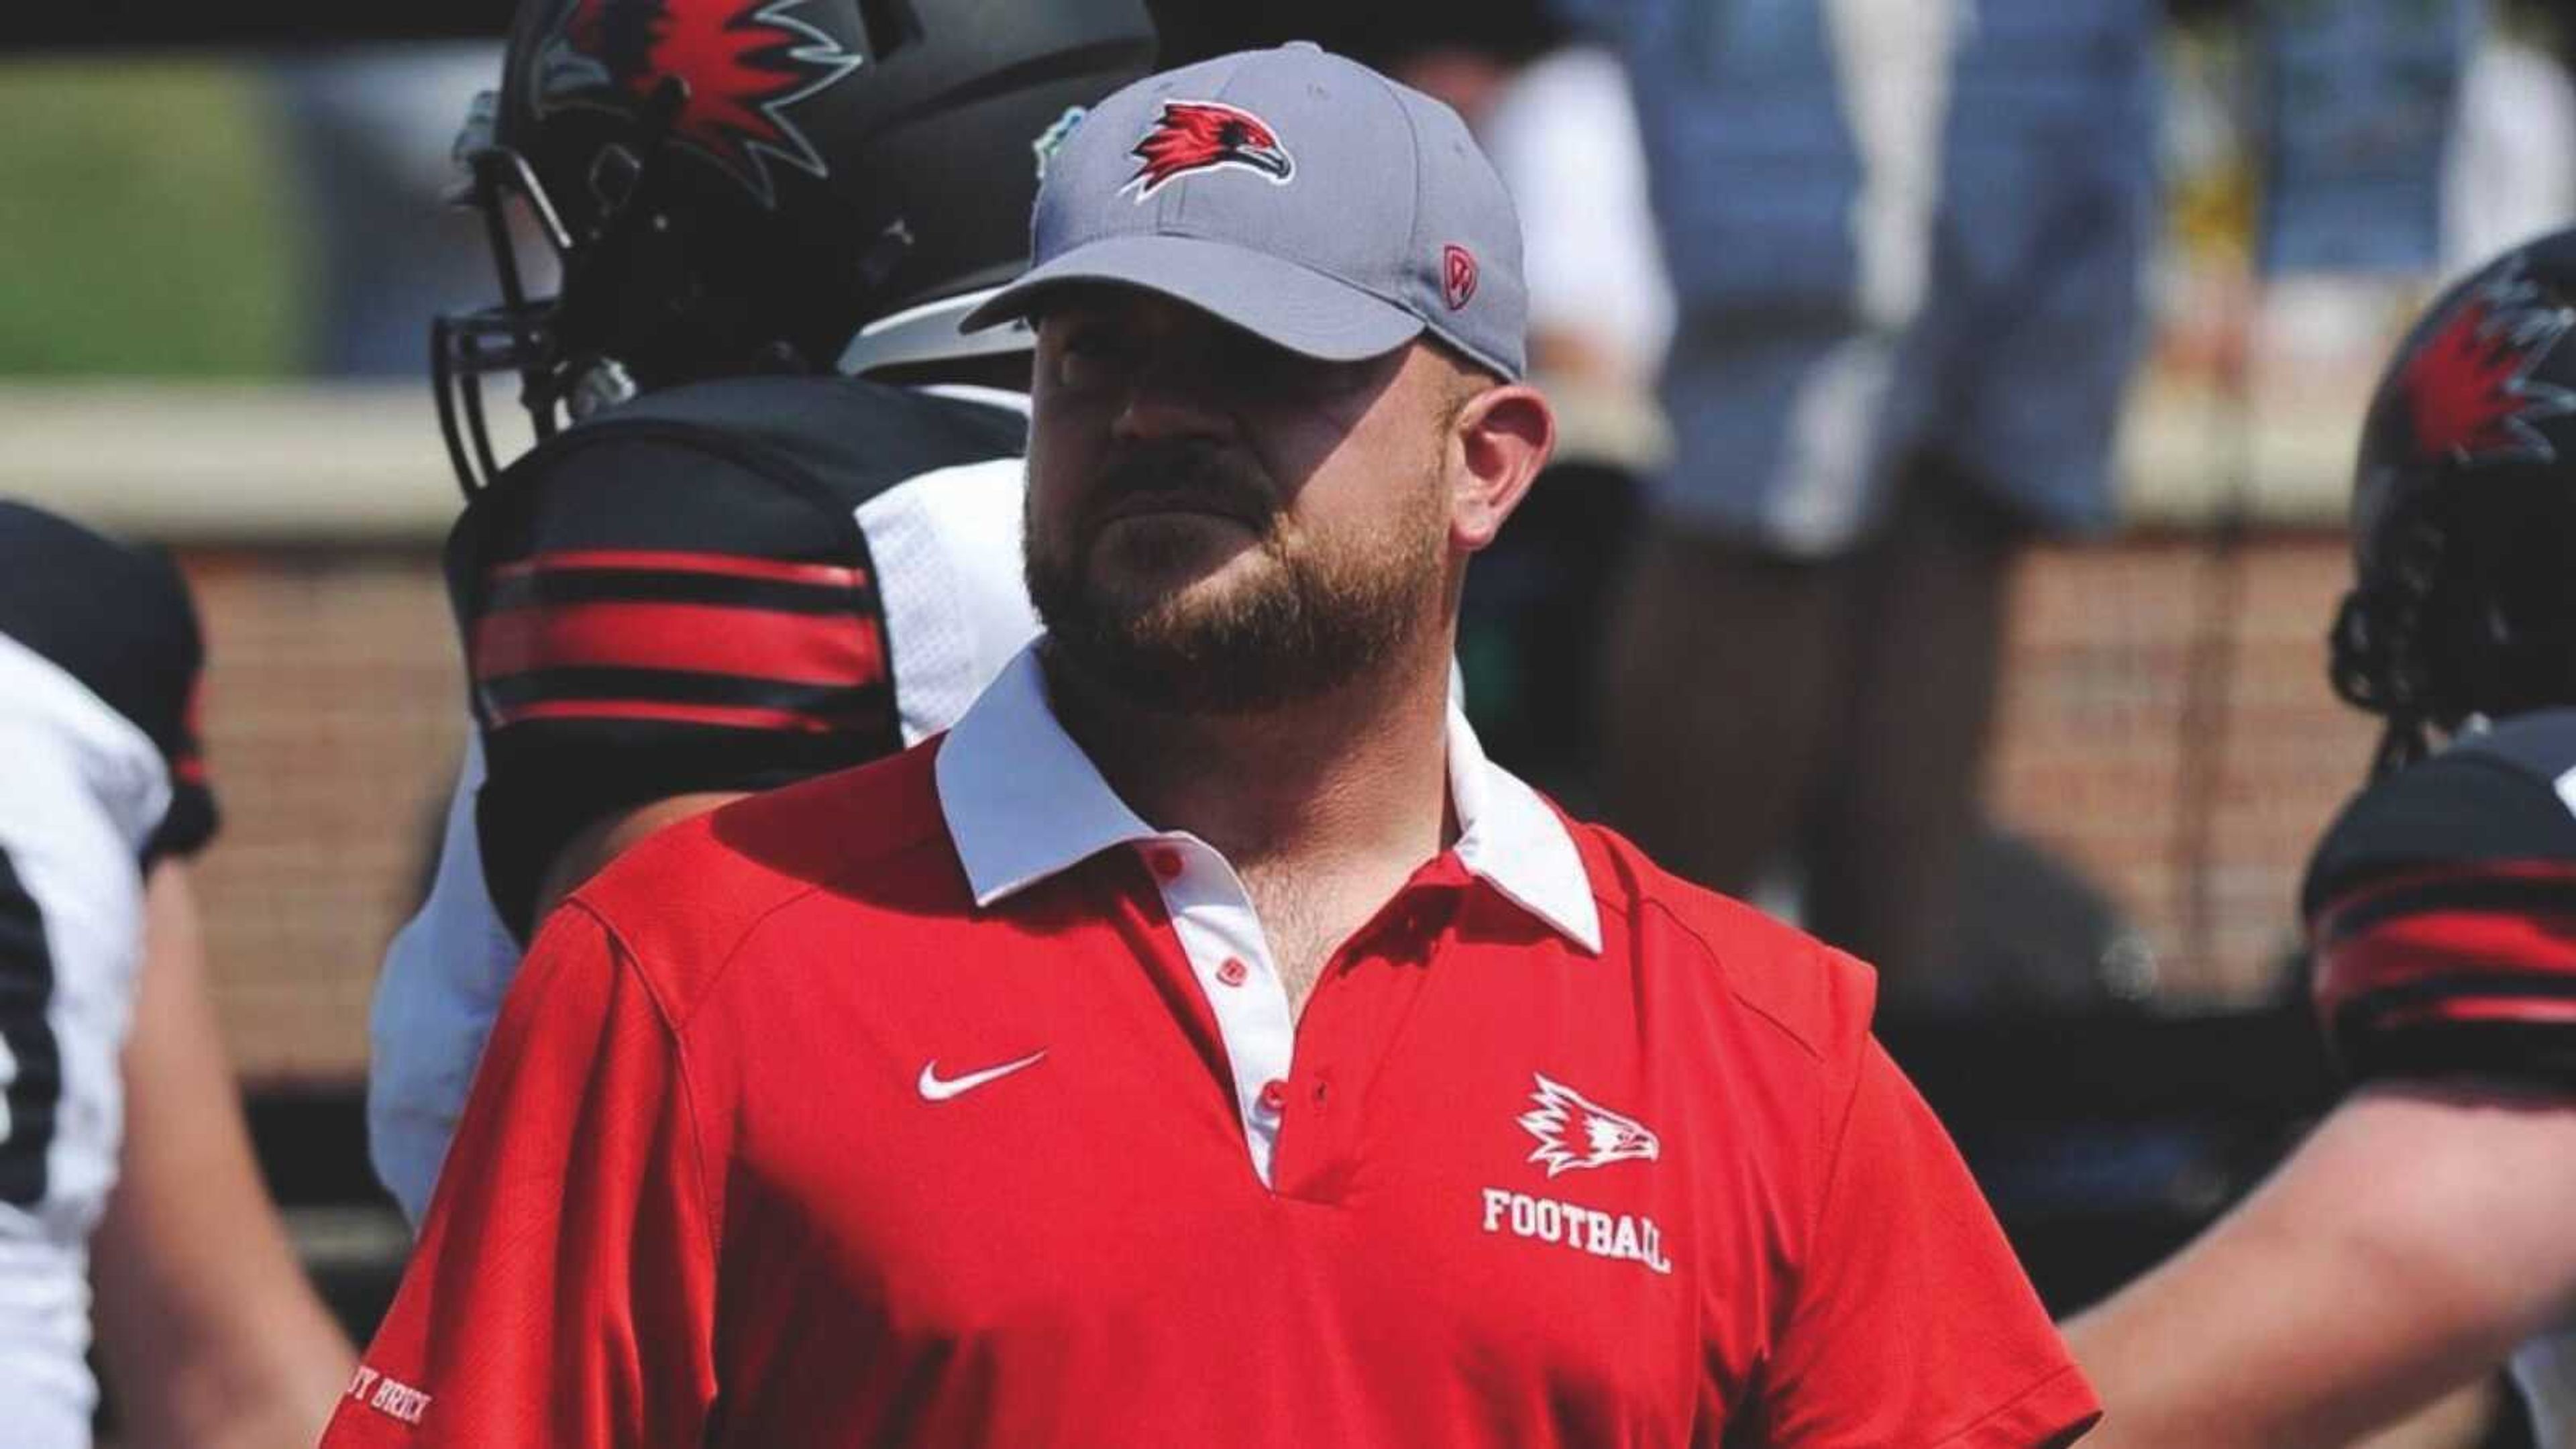 Jon Weimers on the sideline as offensive line coach last season during a Southeast football game.